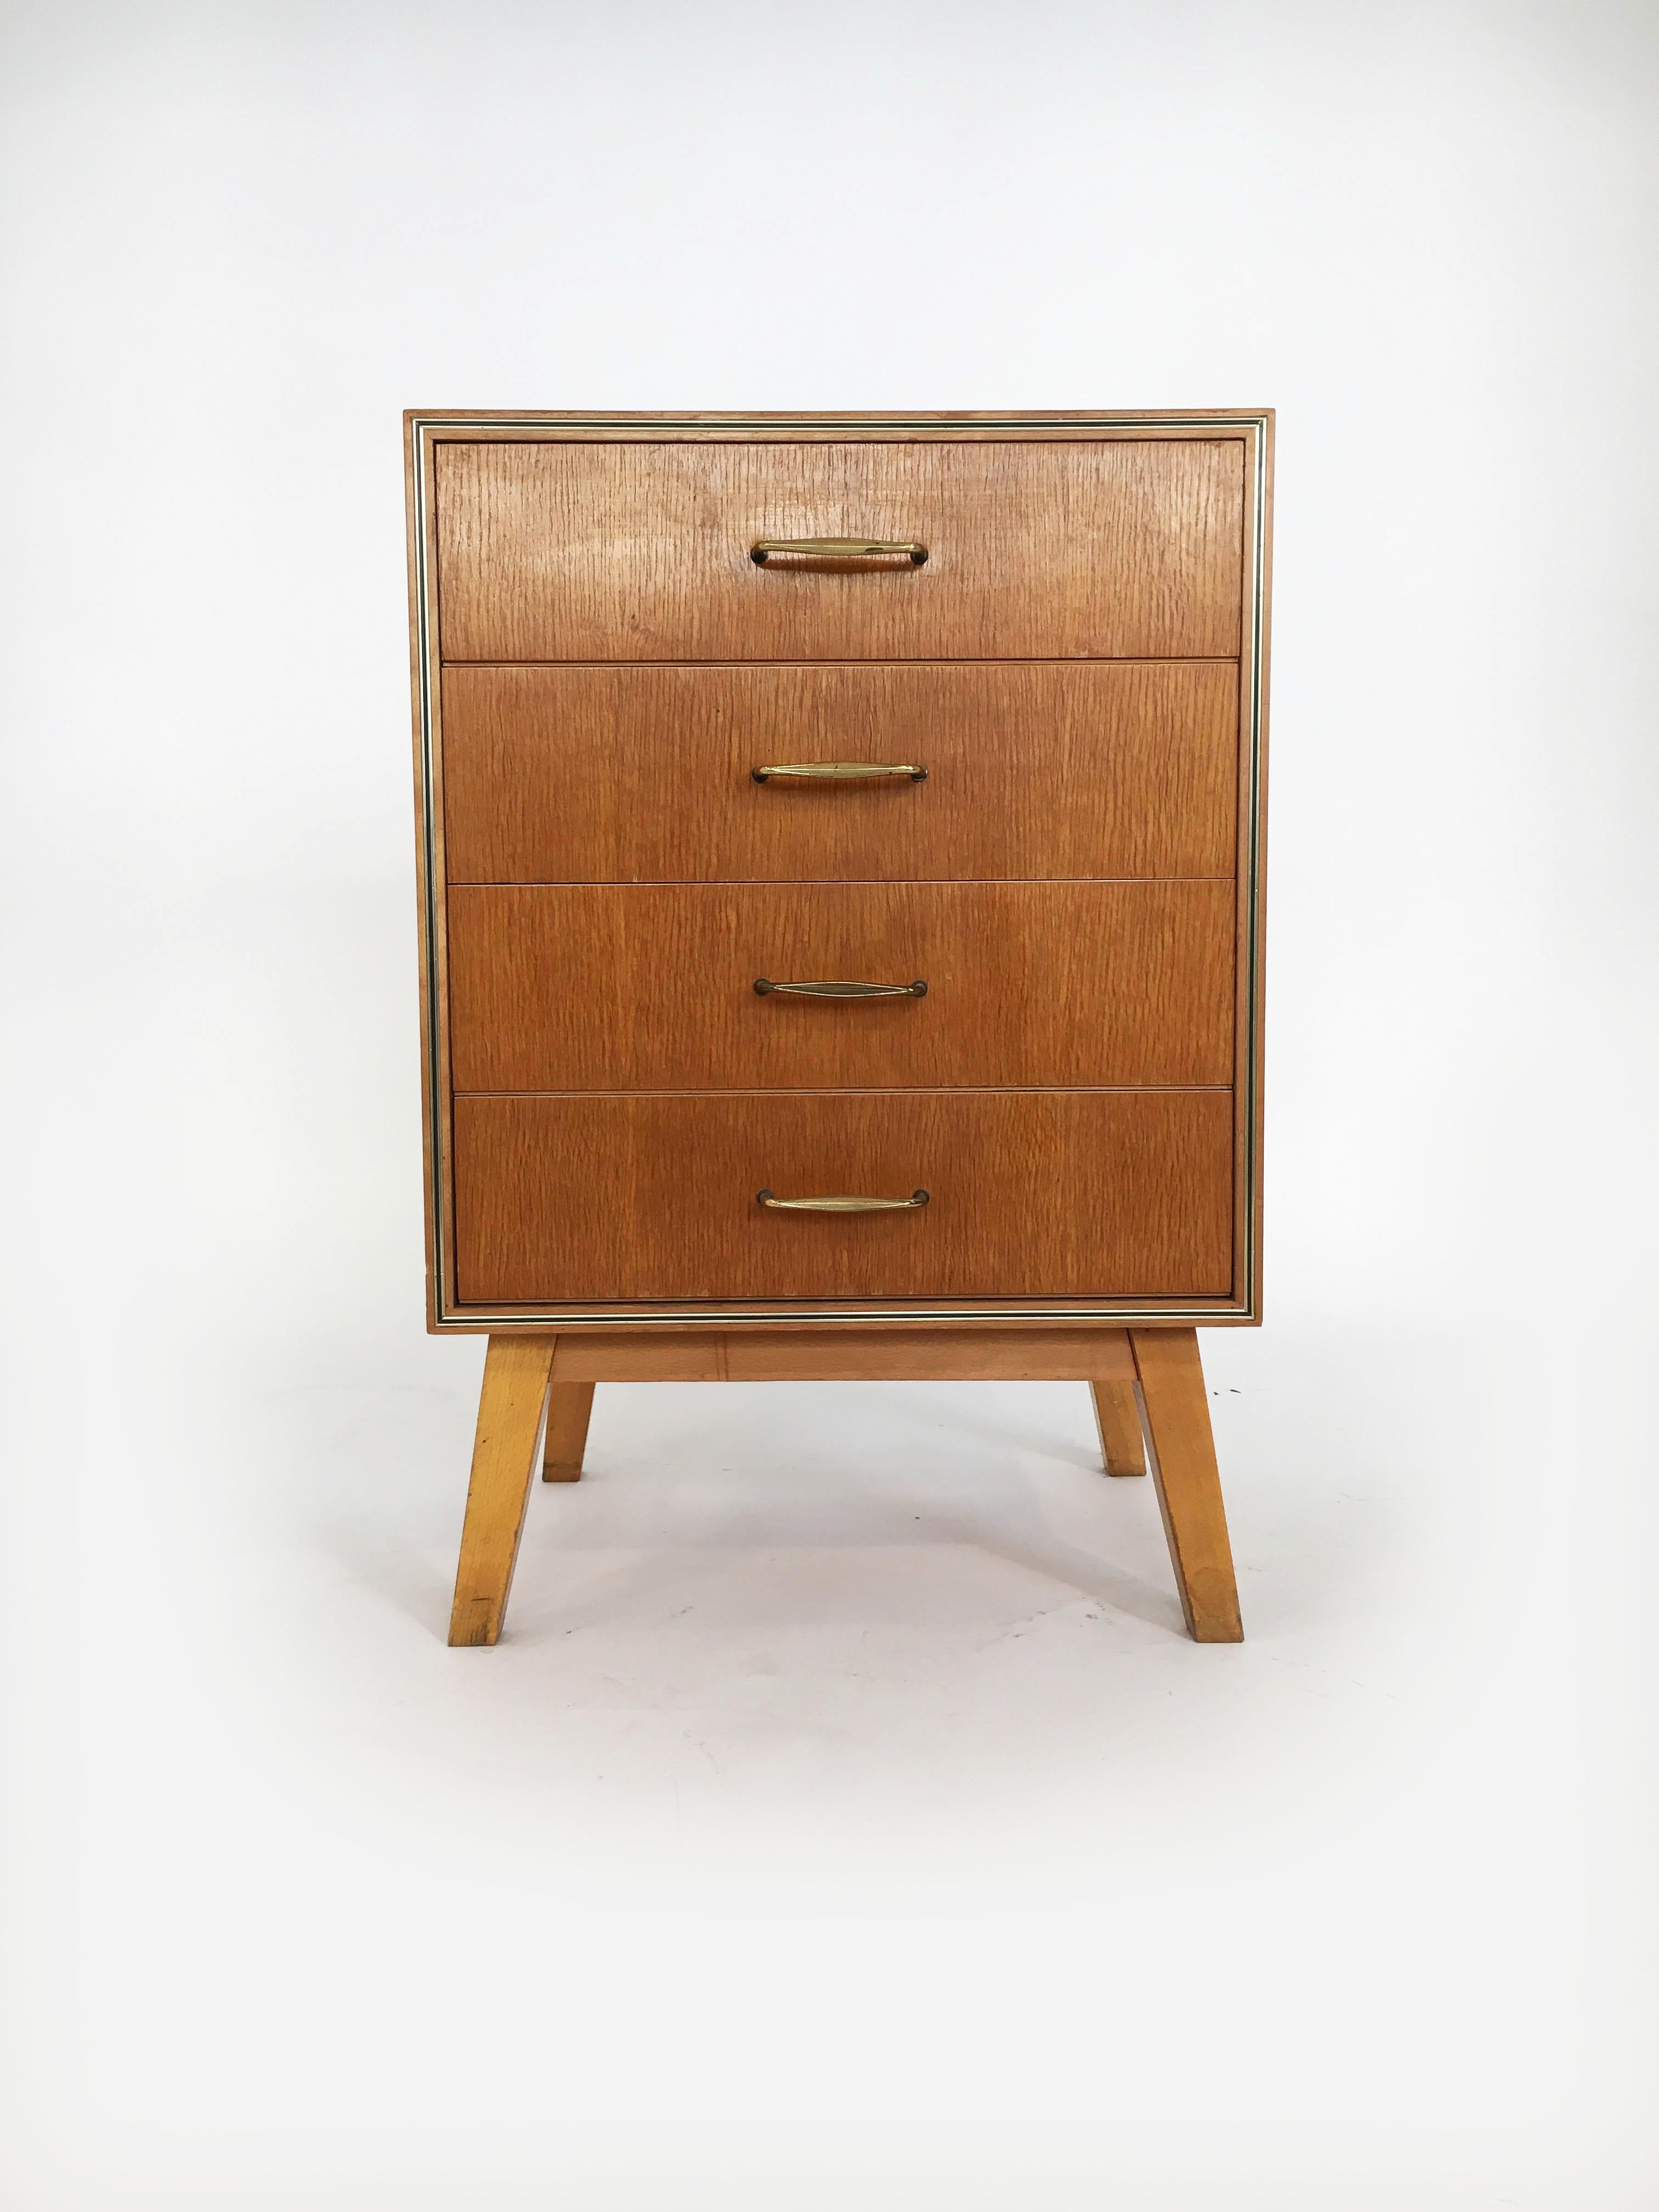 Beech SW Möbel Sideboard, Chest of Drawers, Bookcase Collection, Vienna, 1950s For Sale